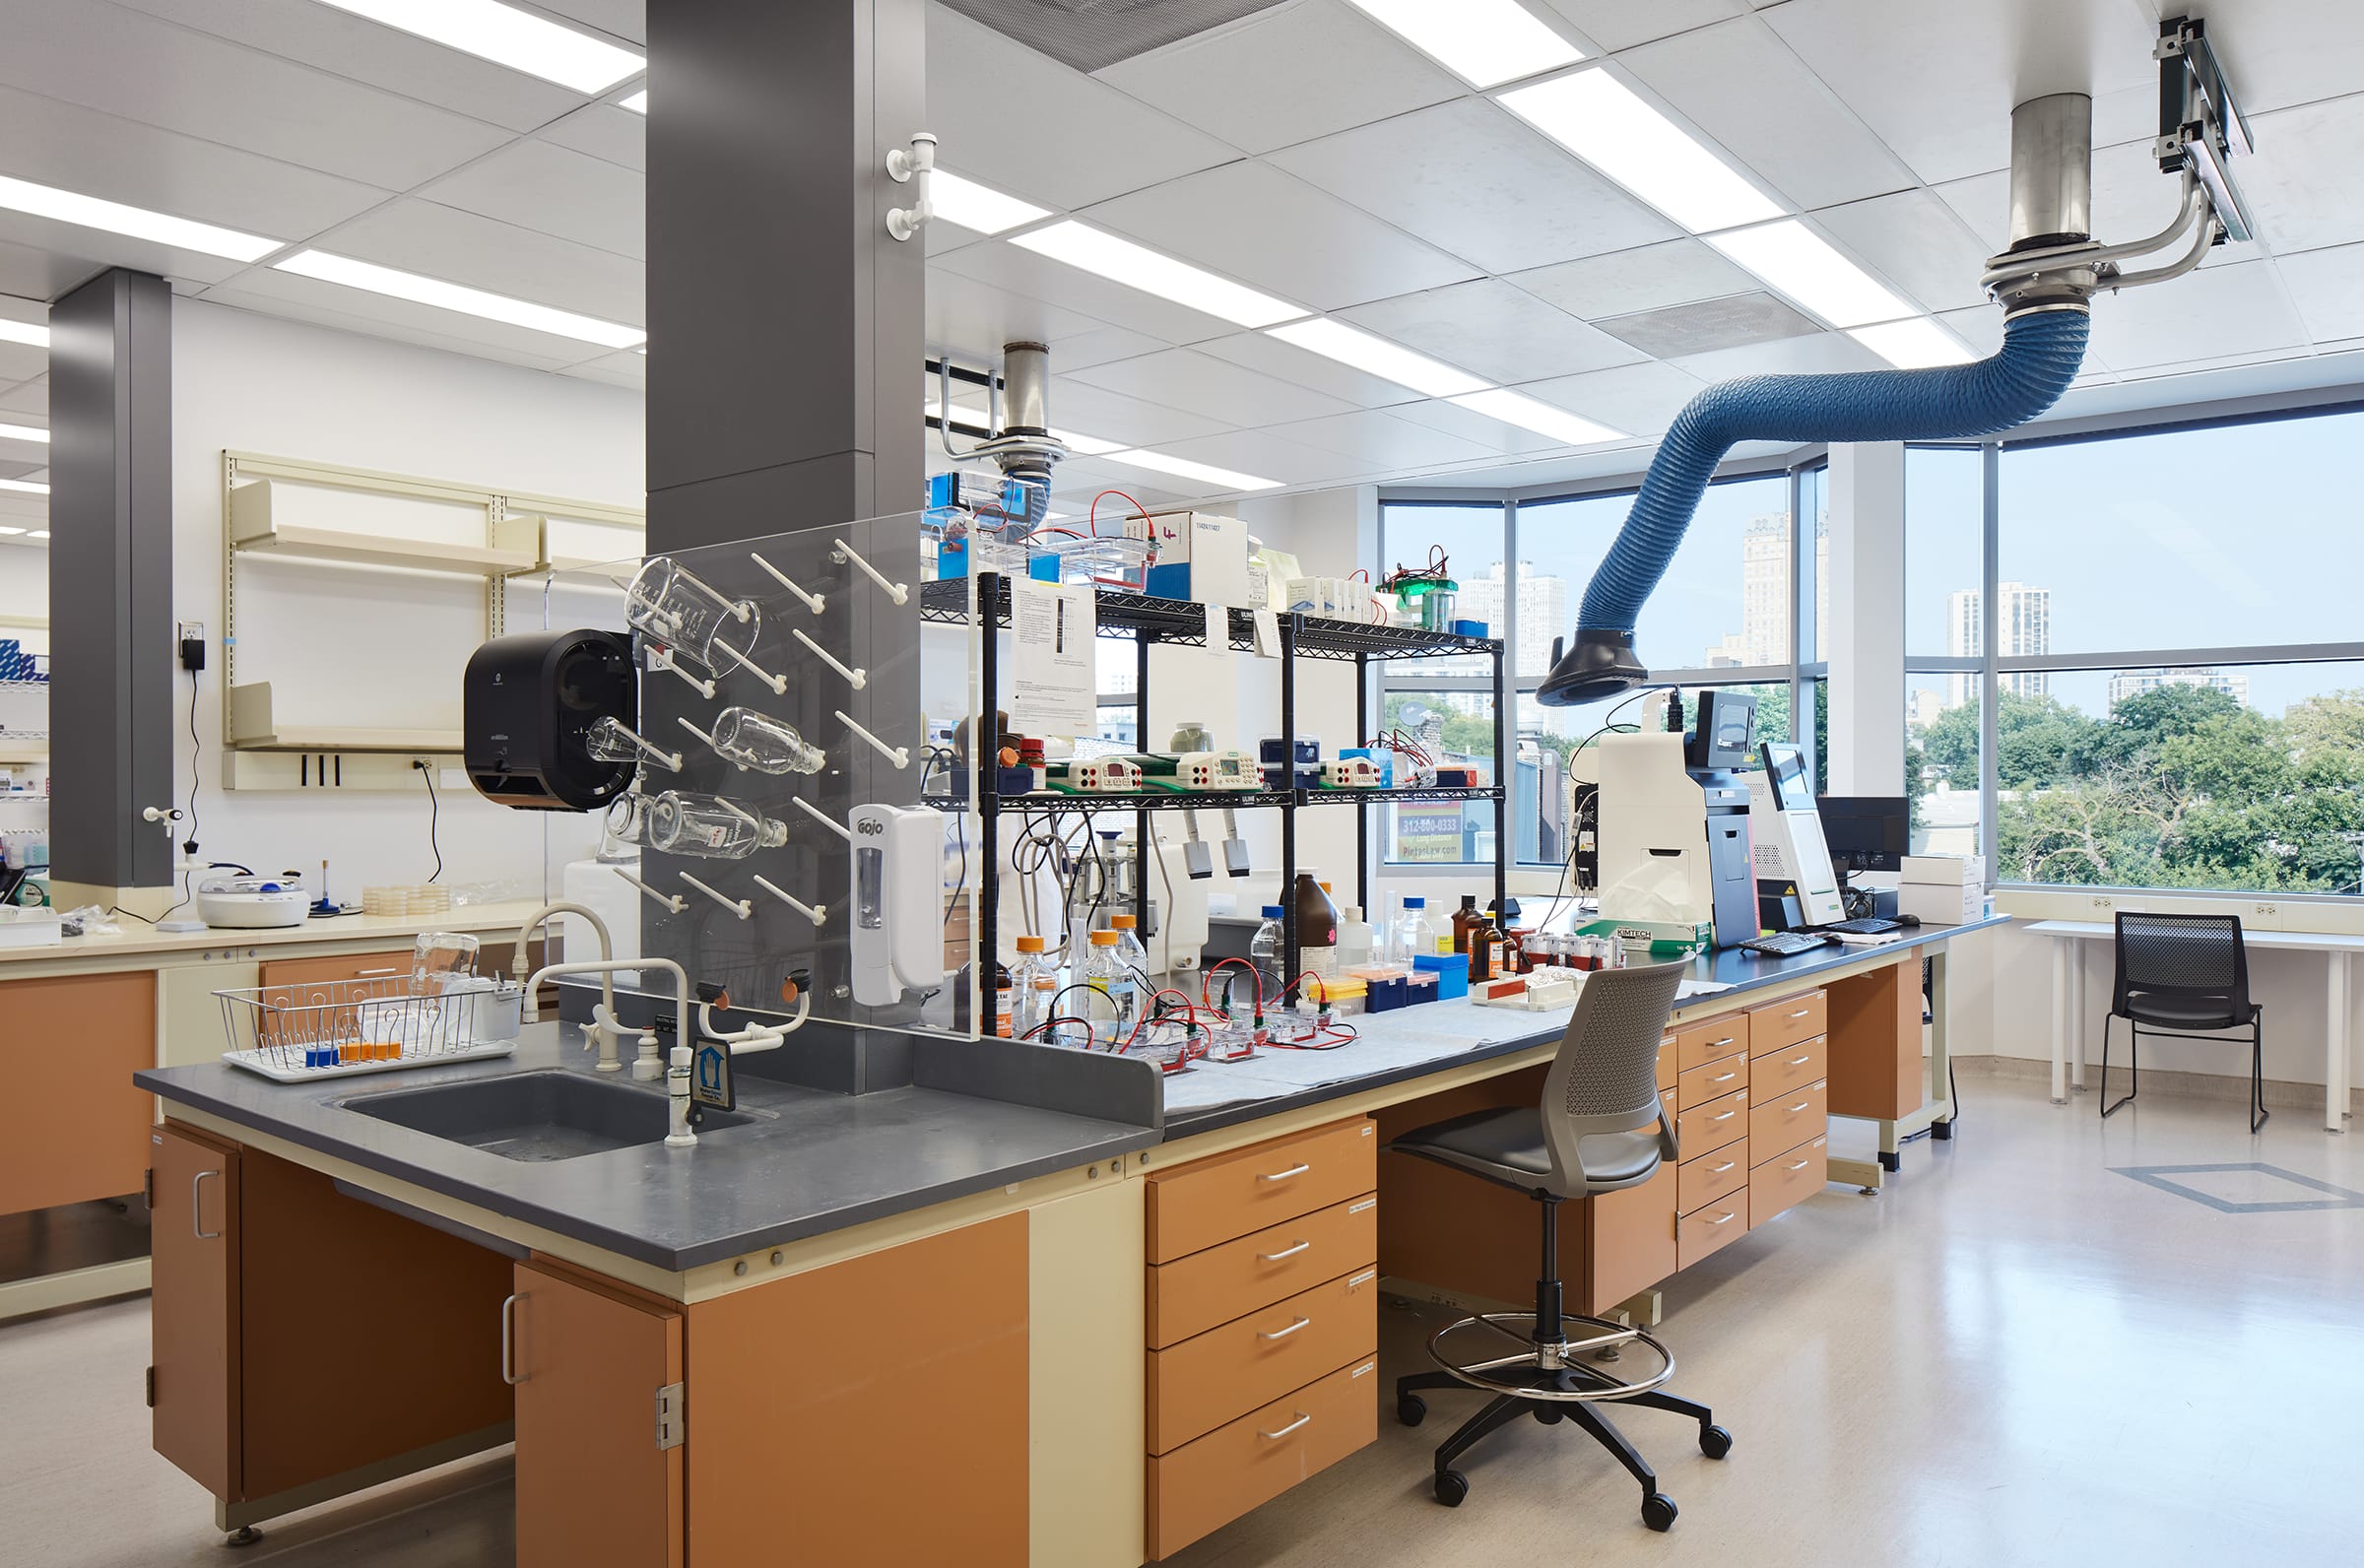 Could your building help meet soaring demand for lab space?